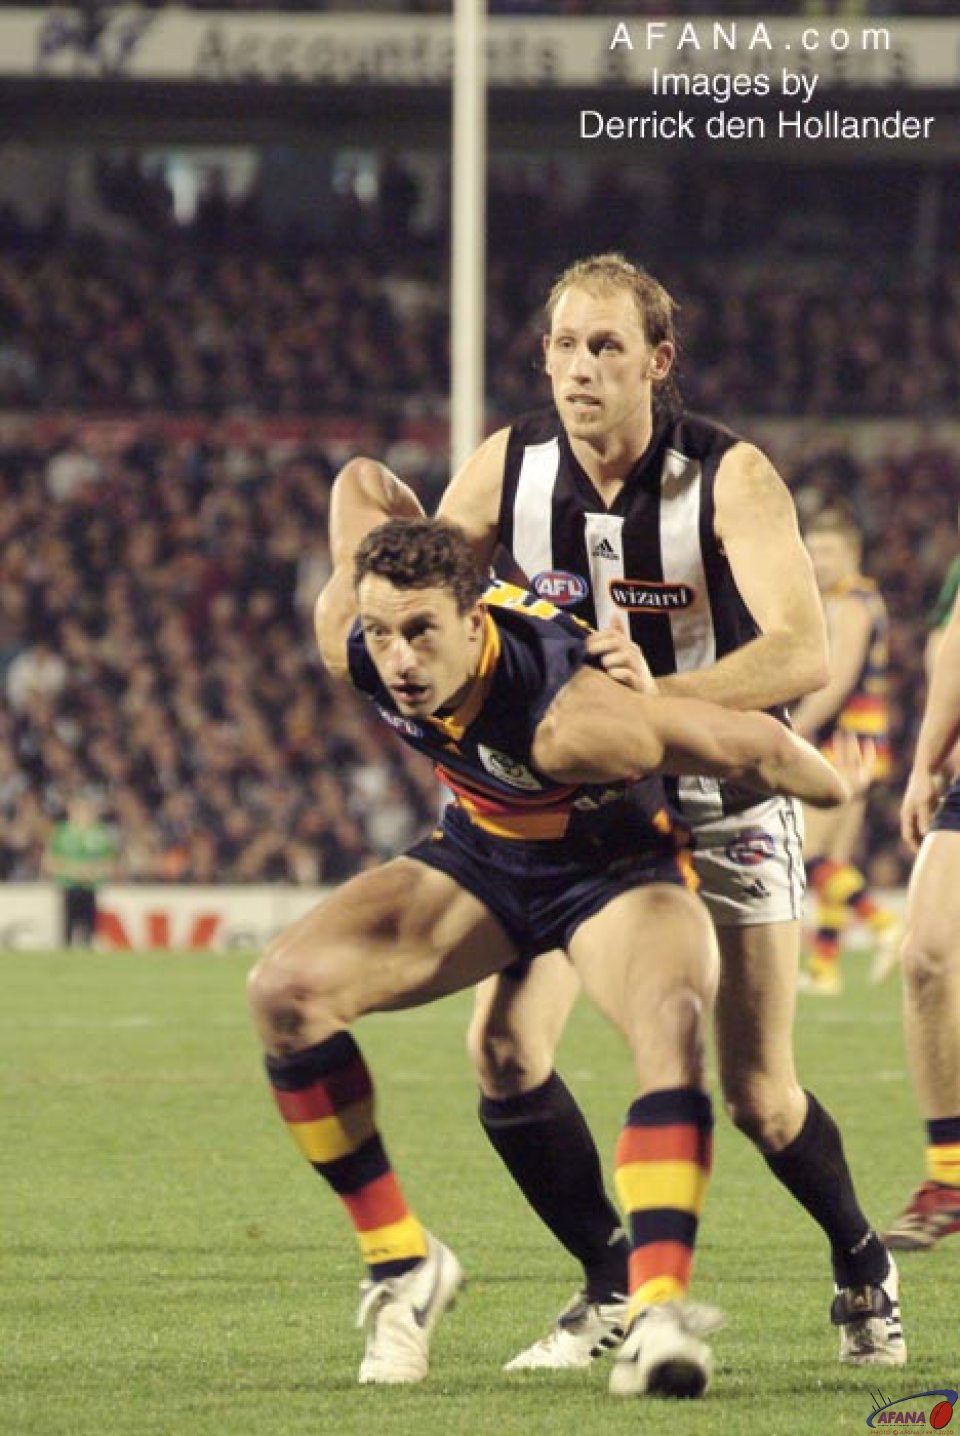 [b]Crows ruckman Matthew Clarke does battle in ruck against the Magpies Josh Fraser[/b]